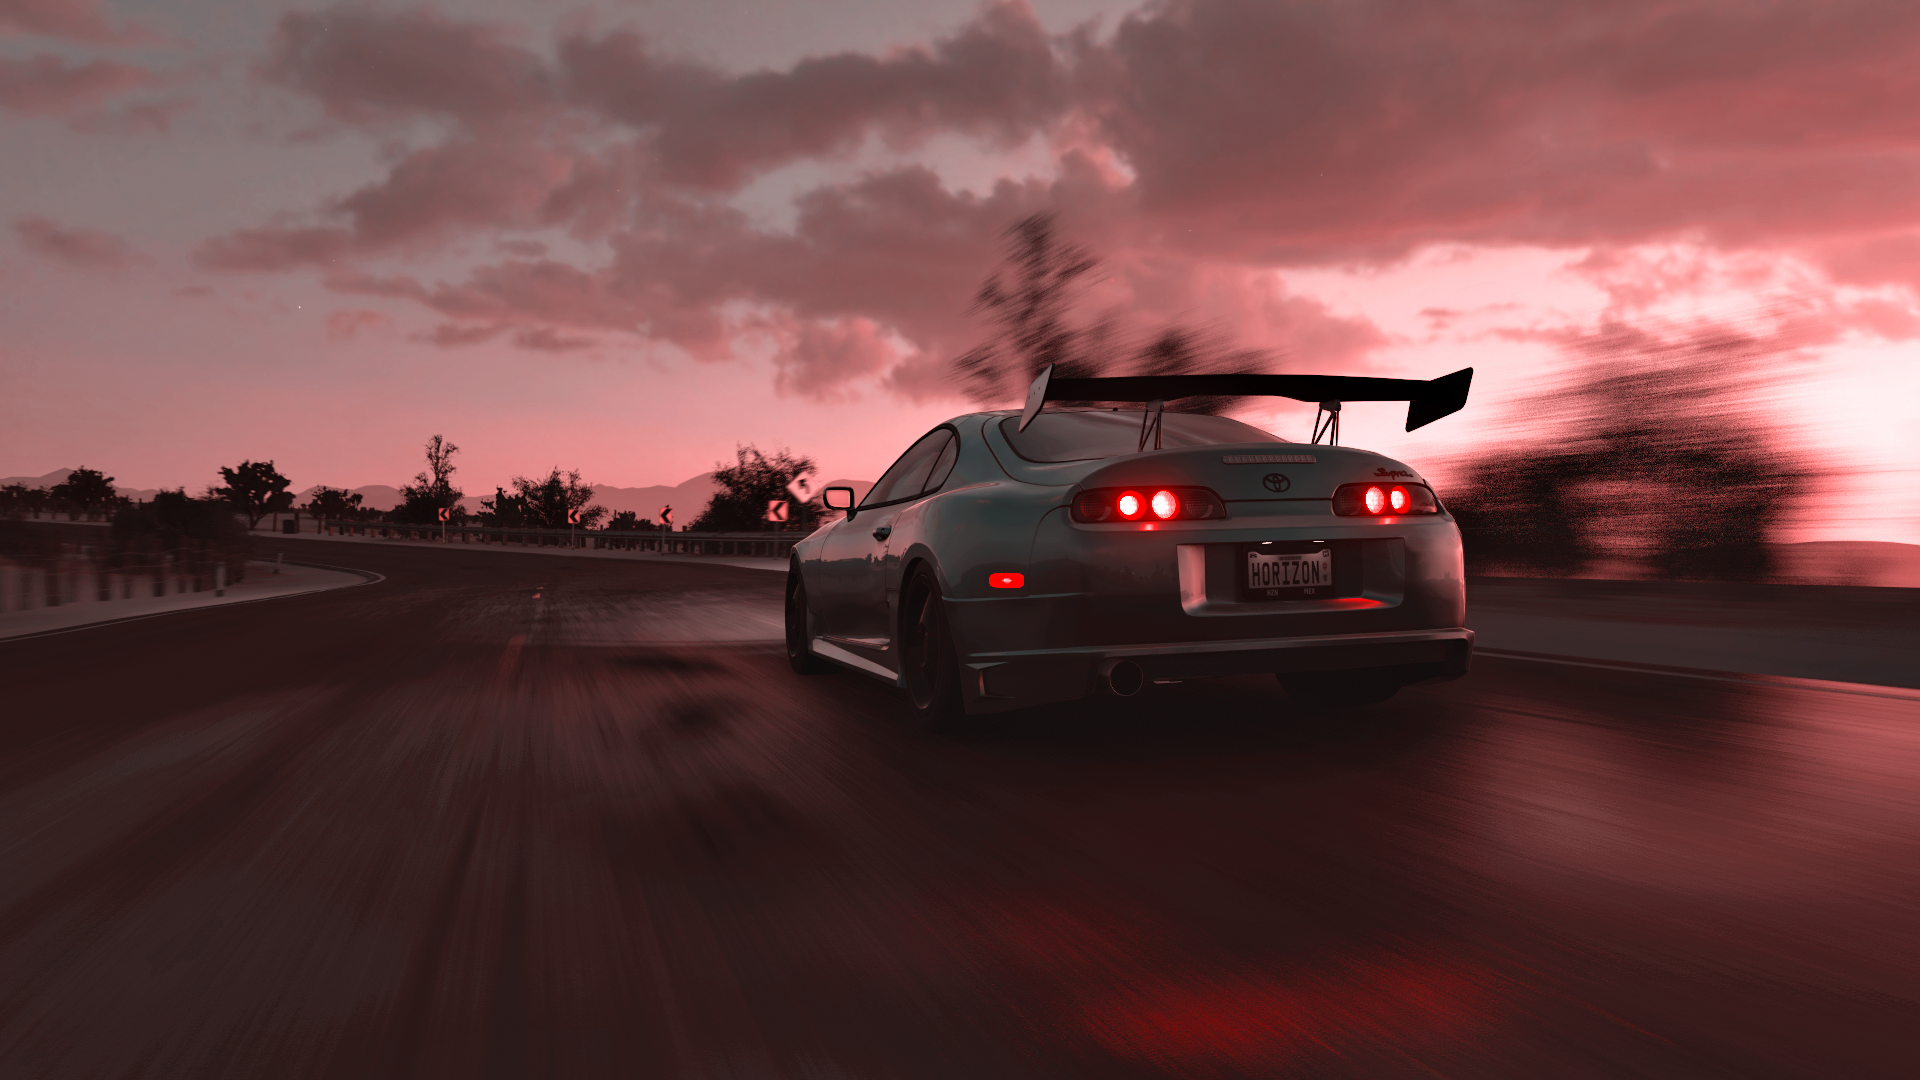 Video Games Forza Forza Horizon 5 Car Vehicle Toyota Toyota Supra Japanese Cars Sky Clouds Road Red 1920x1080